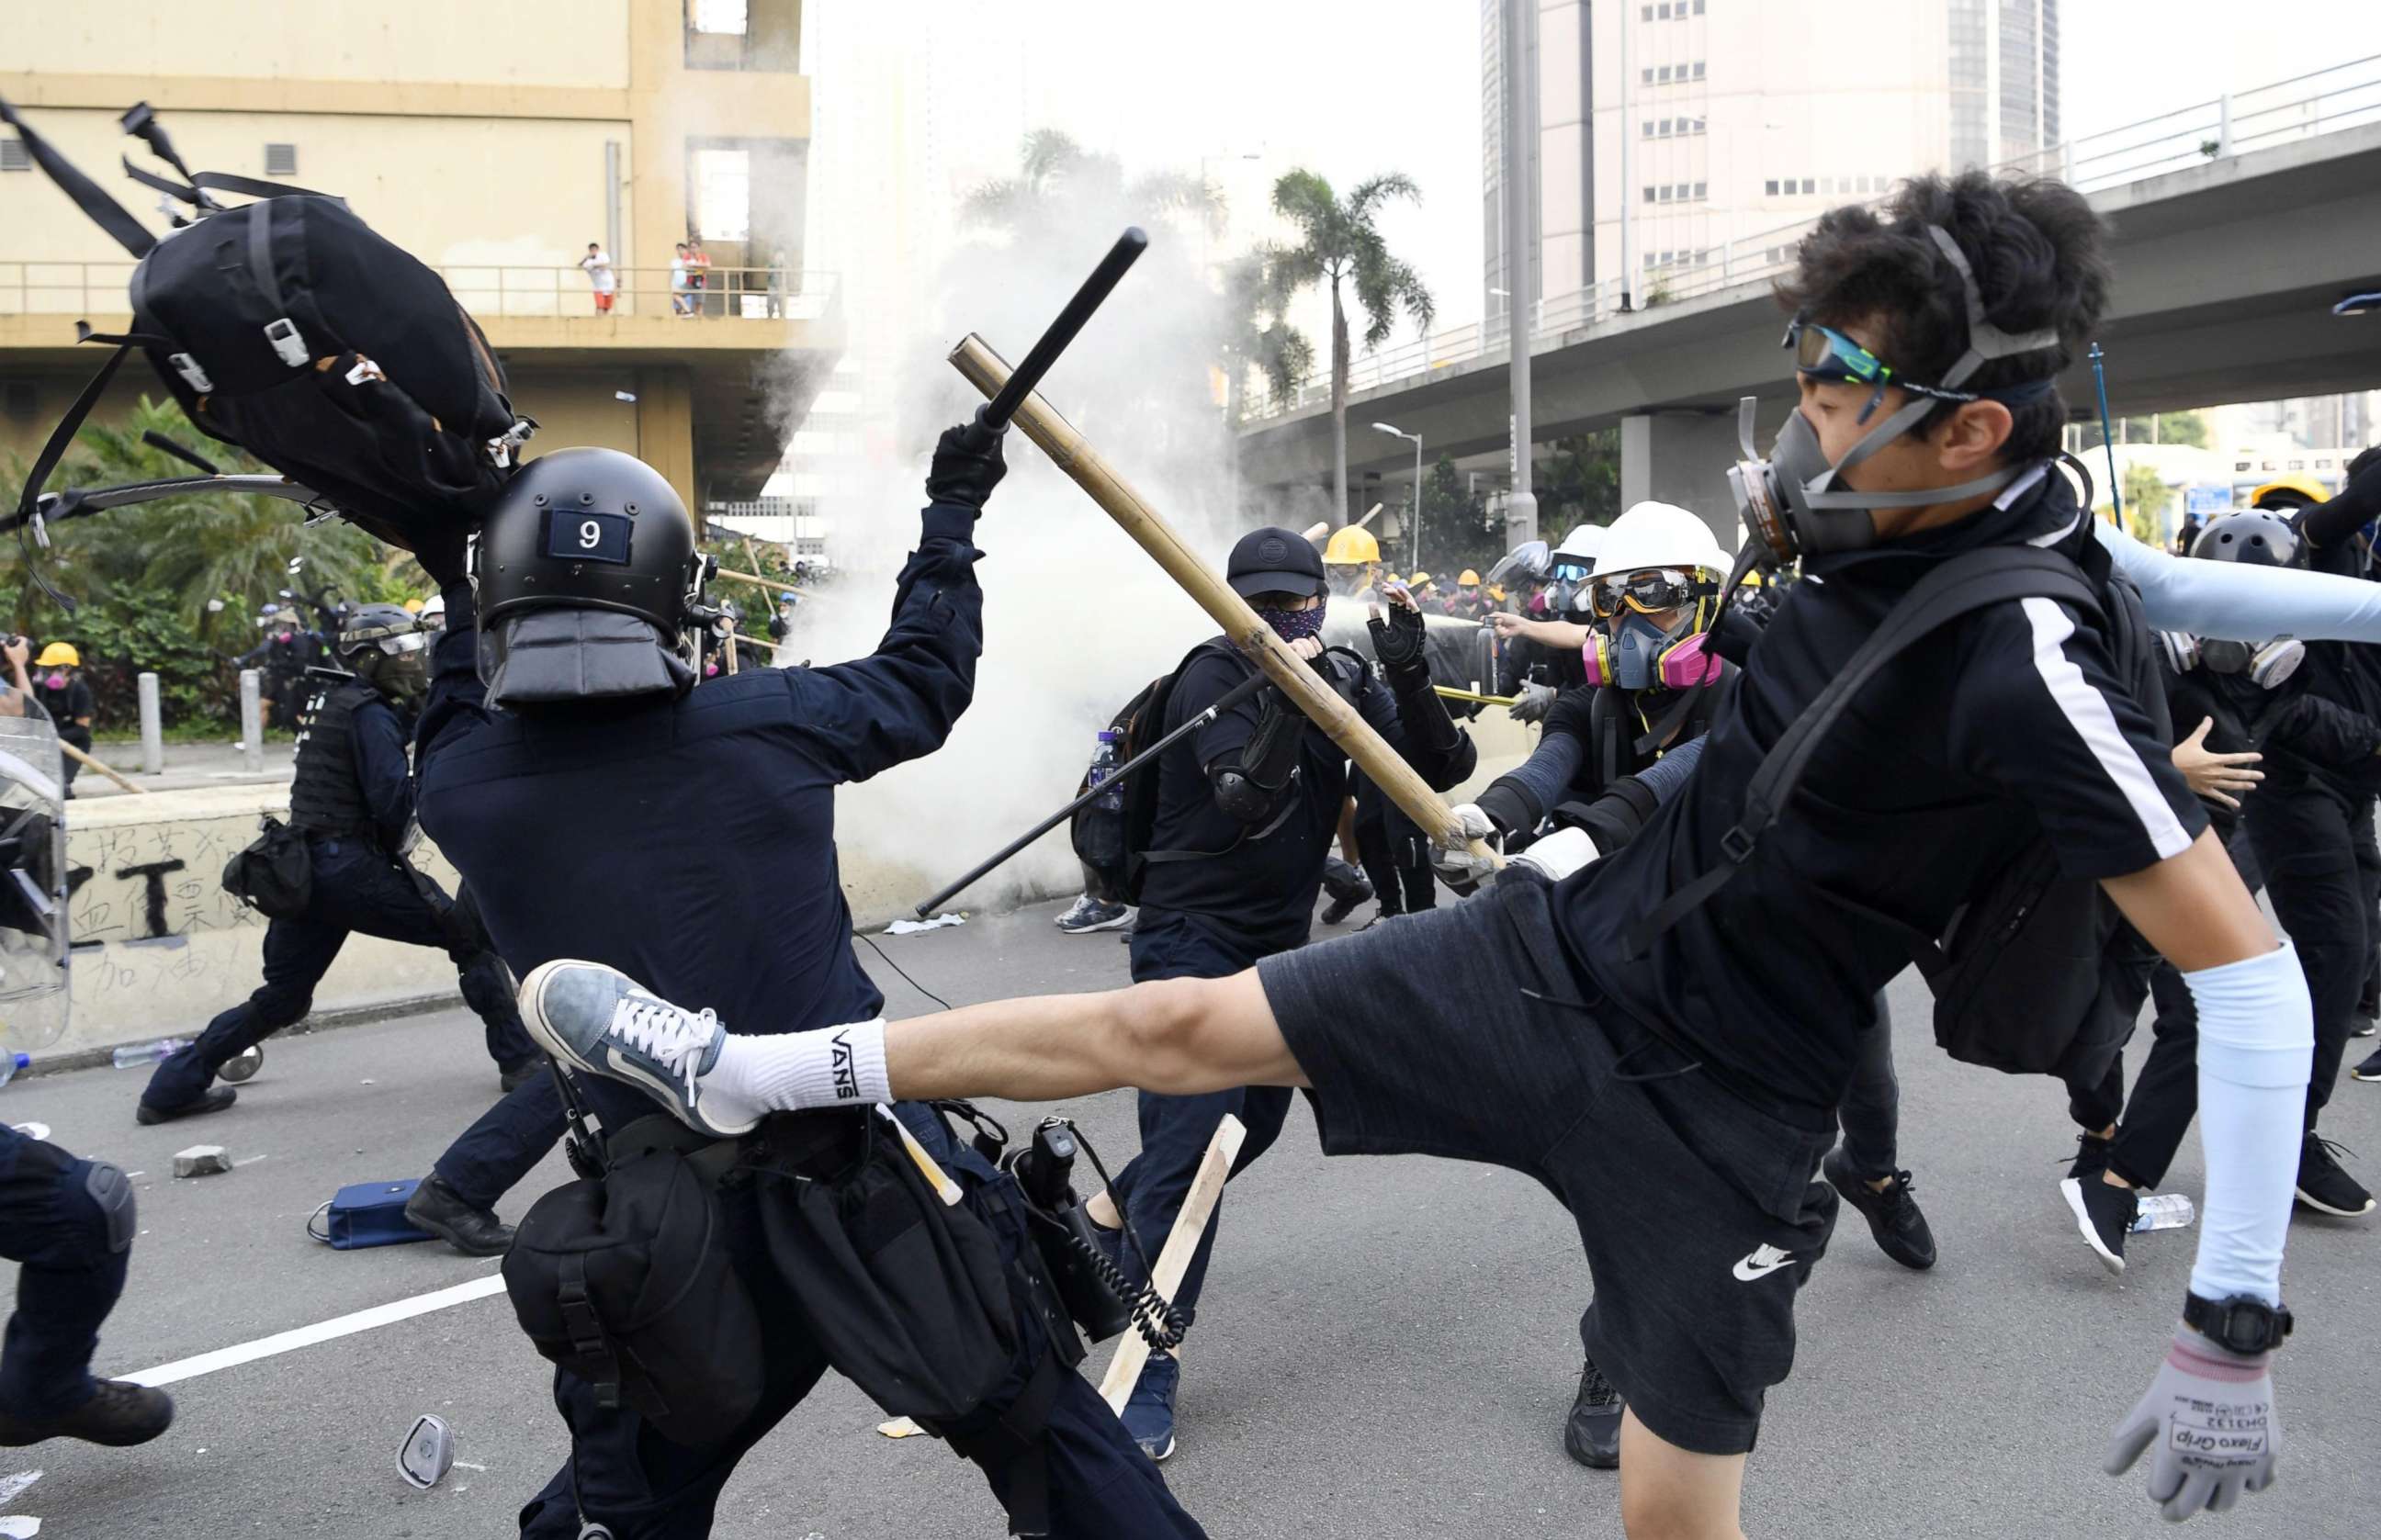 PHOTO: Police and protesters clash in Hong Kong's Kowloon area on Aug. 24, 2019.